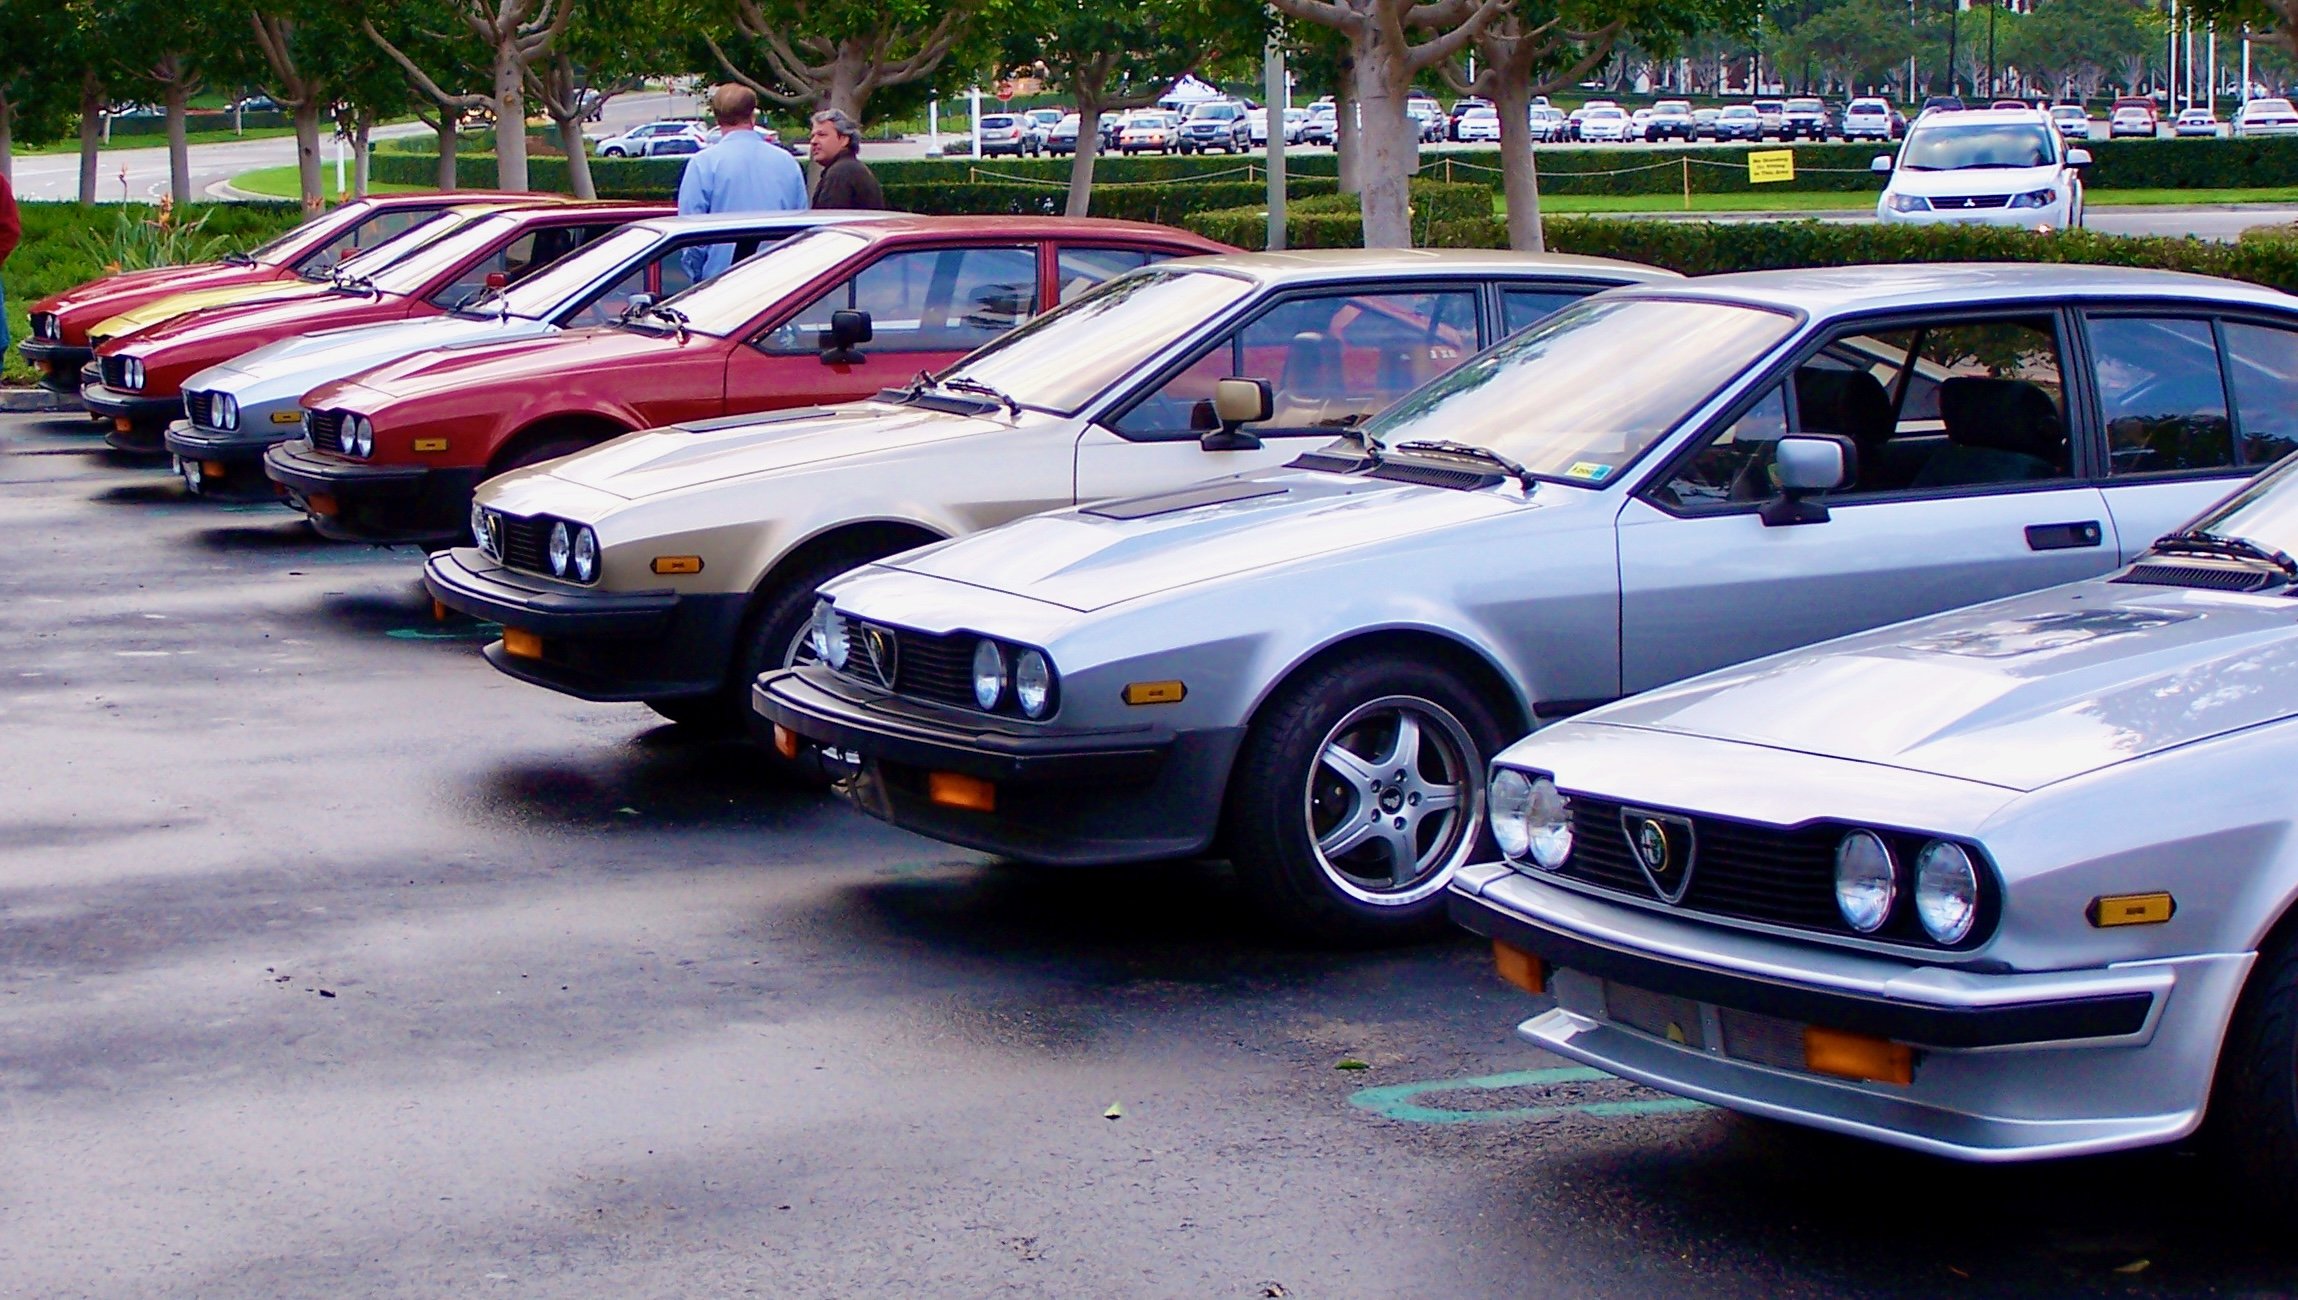 GTV6 Day at Cars and Coffee Irvine.jpeg